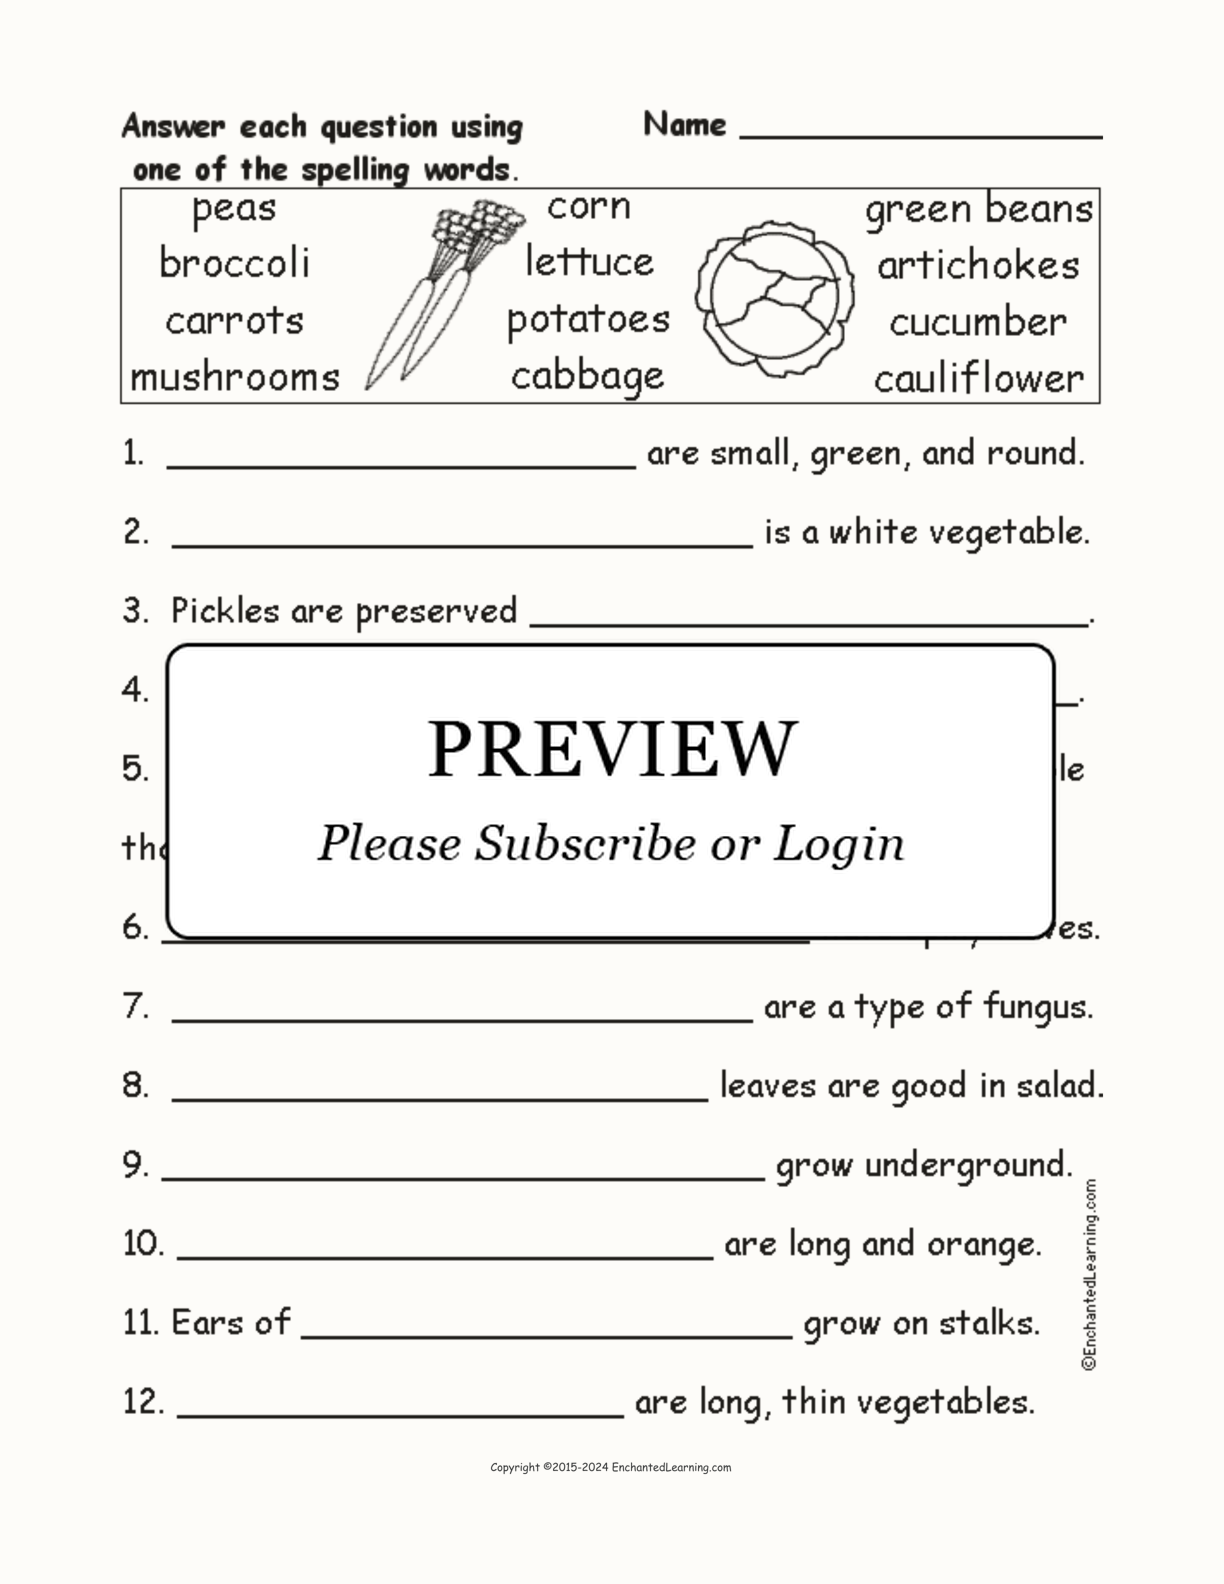 Vegetables Spelling Word Questions interactive worksheet page 1